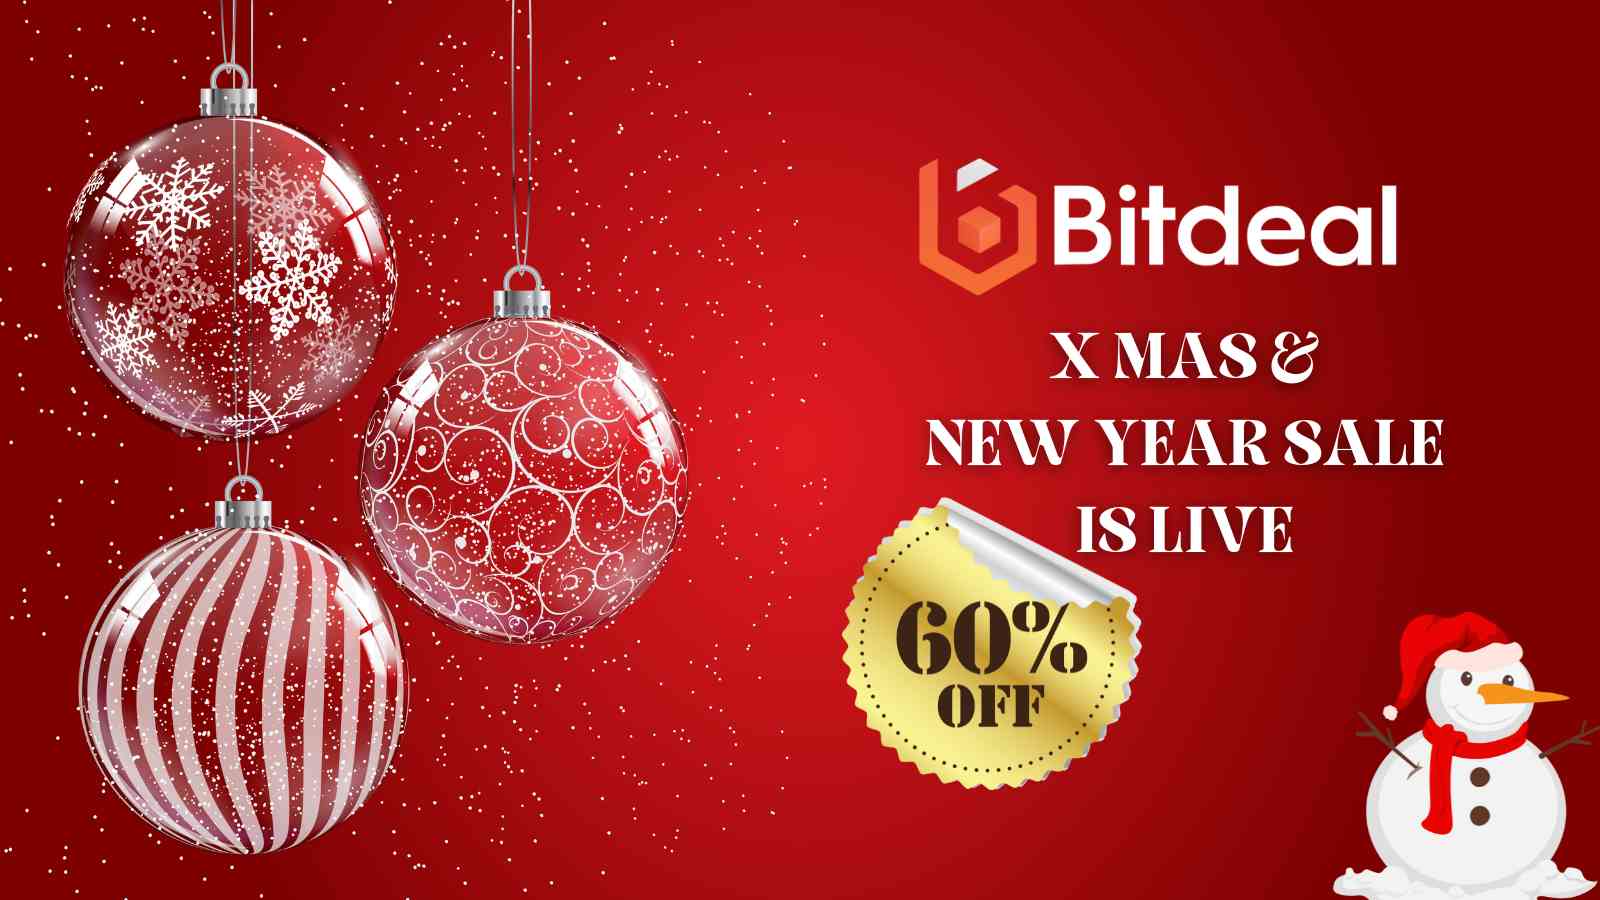 Celebrate This Christmas, New Year With Bitdeal: Offers Up To 60% On All Major Services